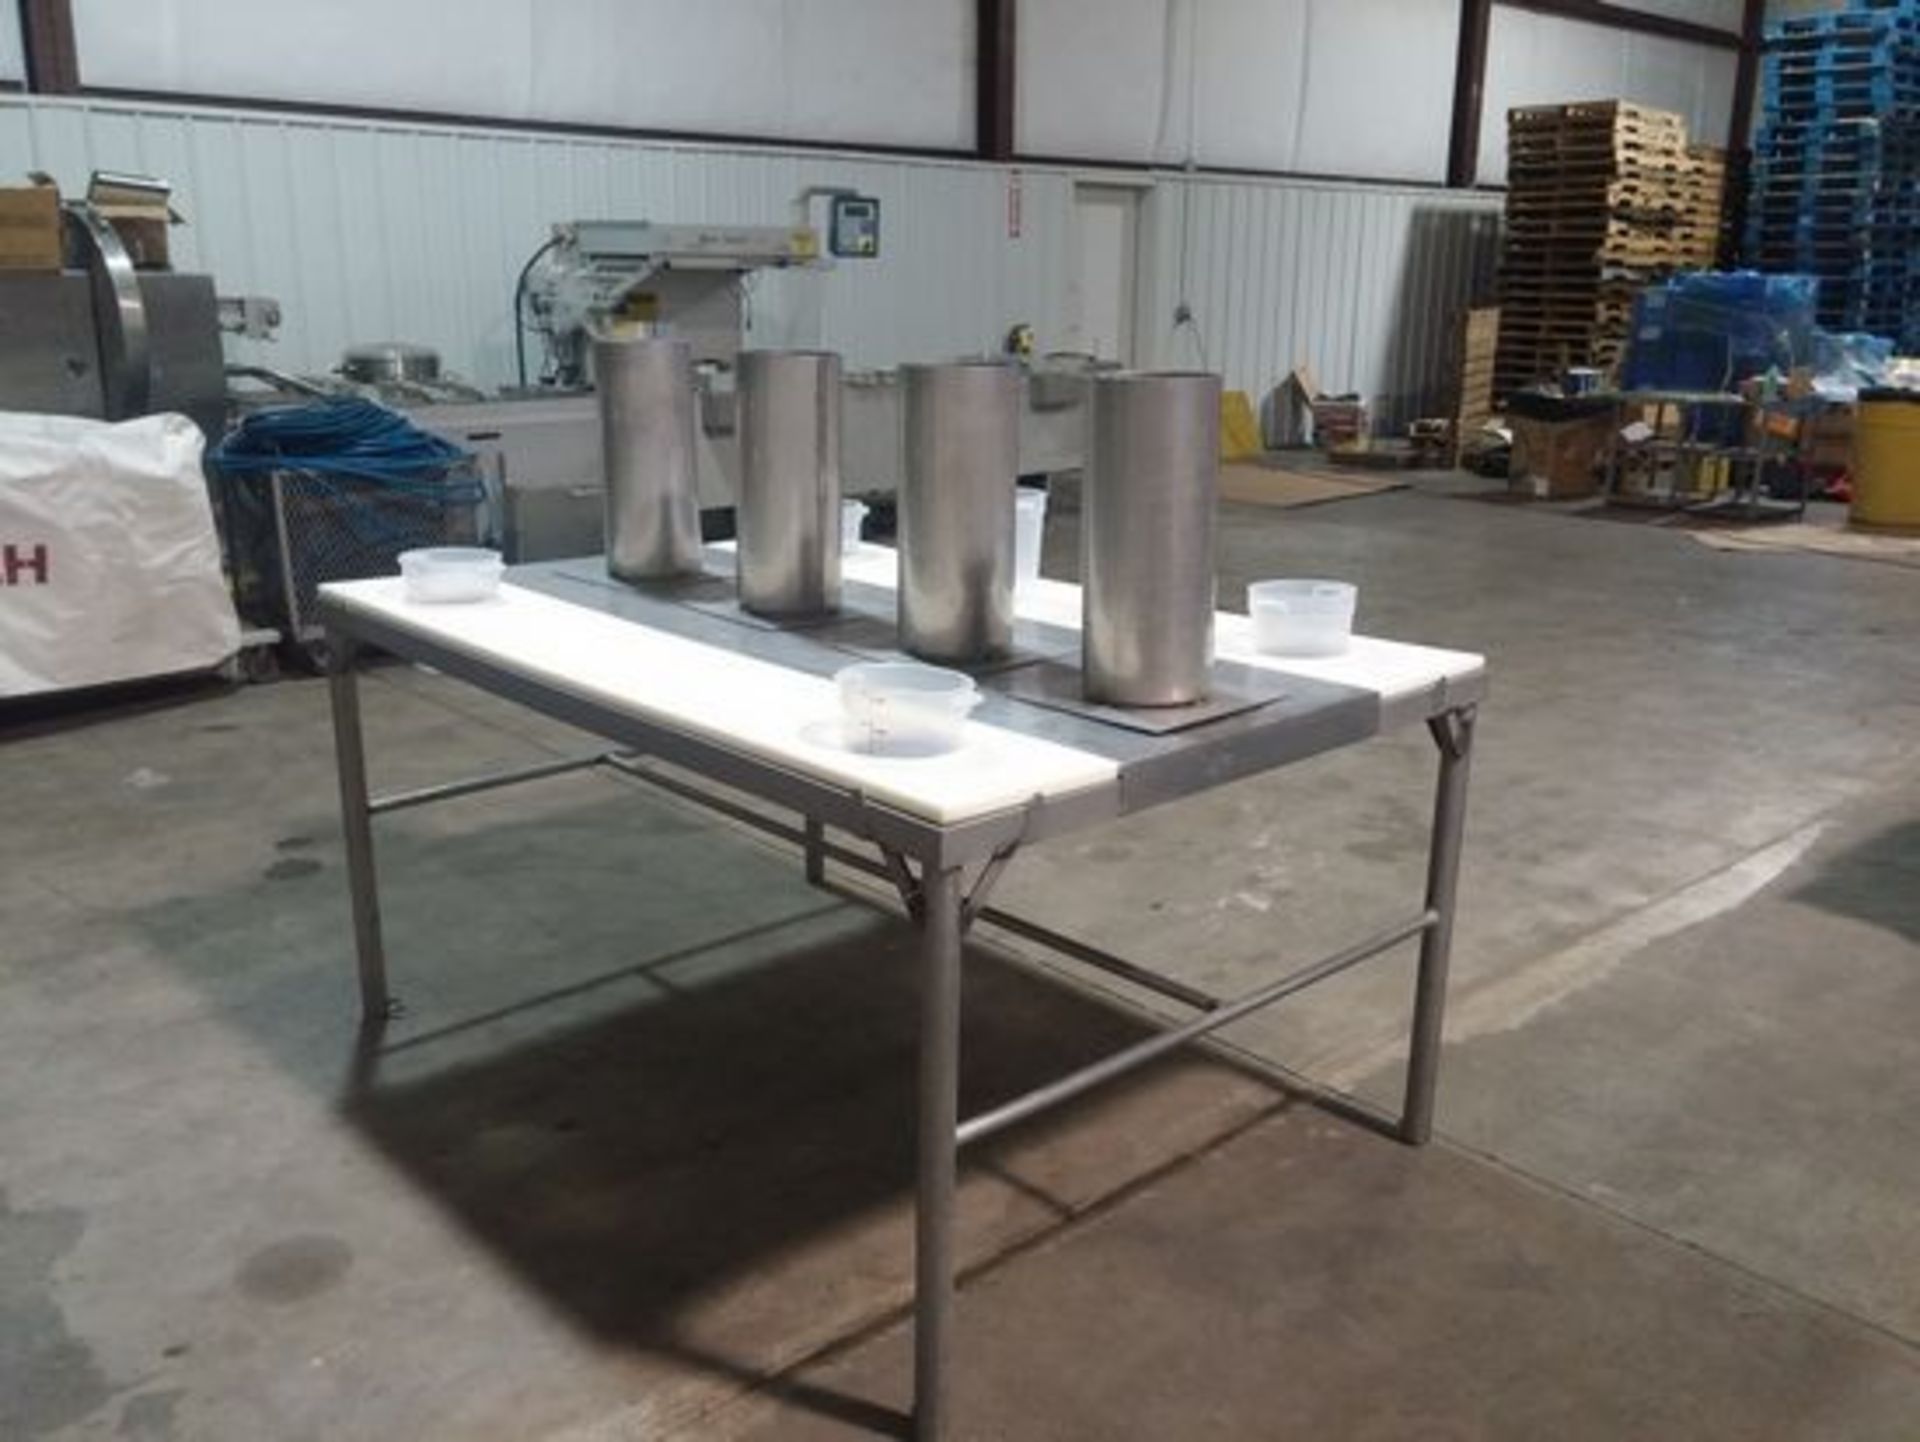 S/S trim or Bagging Table. This 6'L table has 12" cutting boards on both sides of its 48" width.